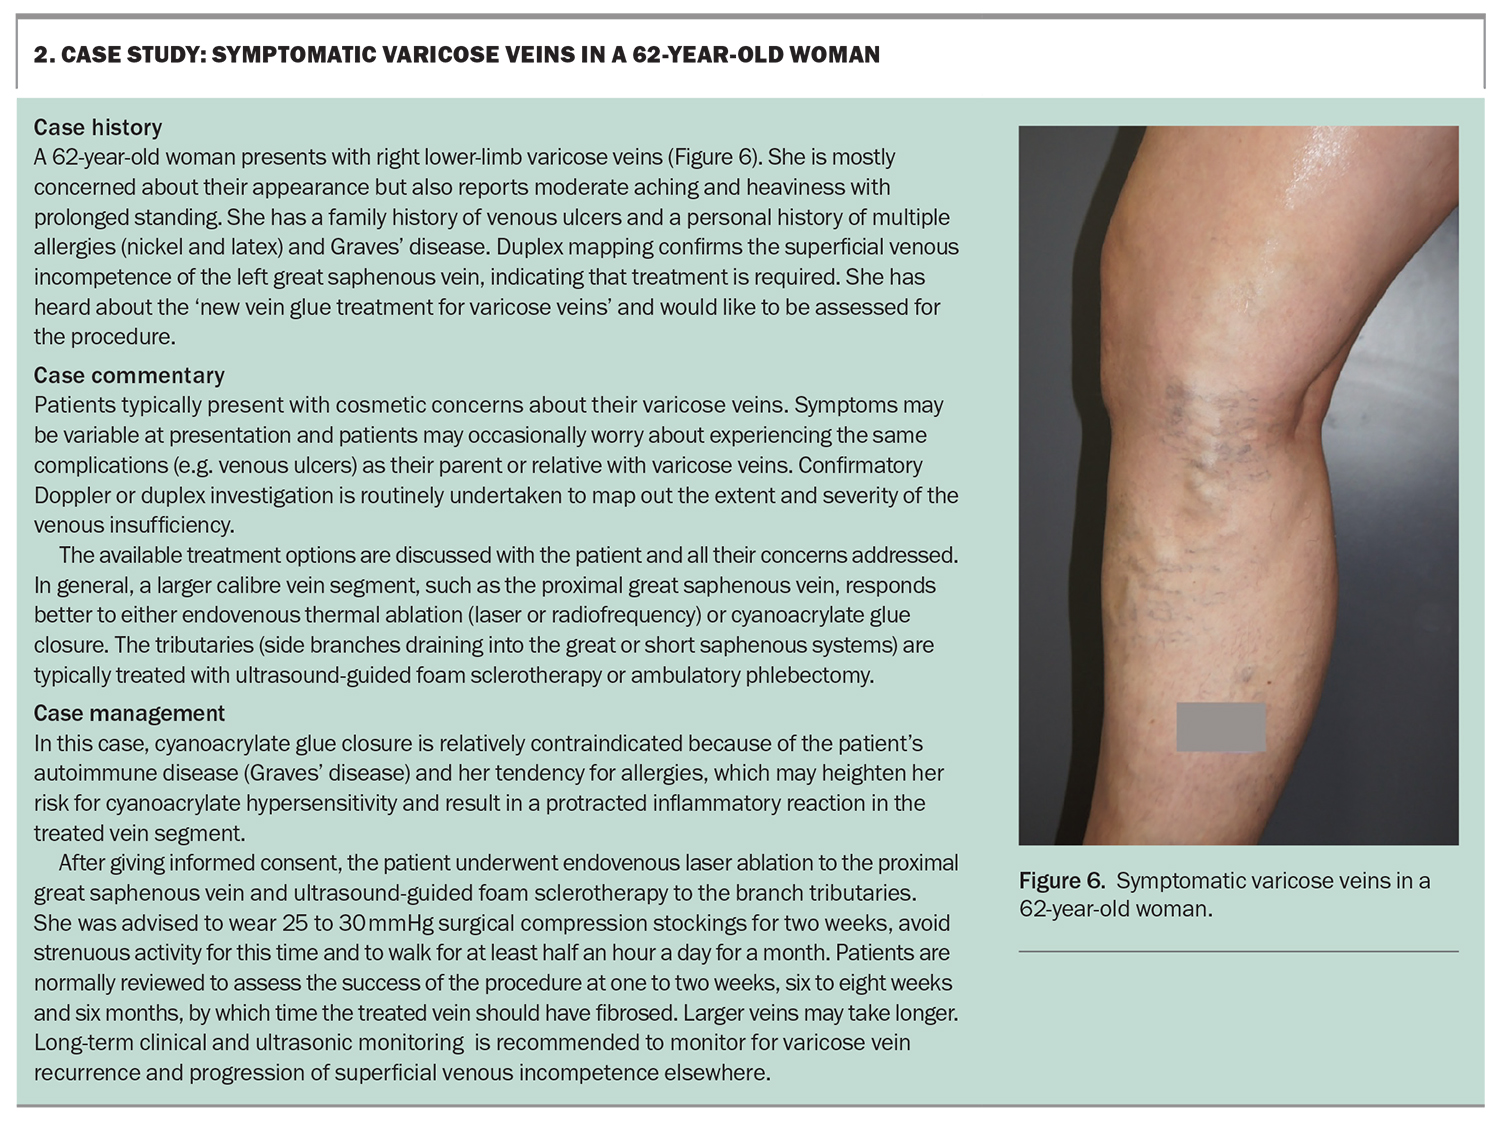 Varicose veins – more than a cosmetic concern